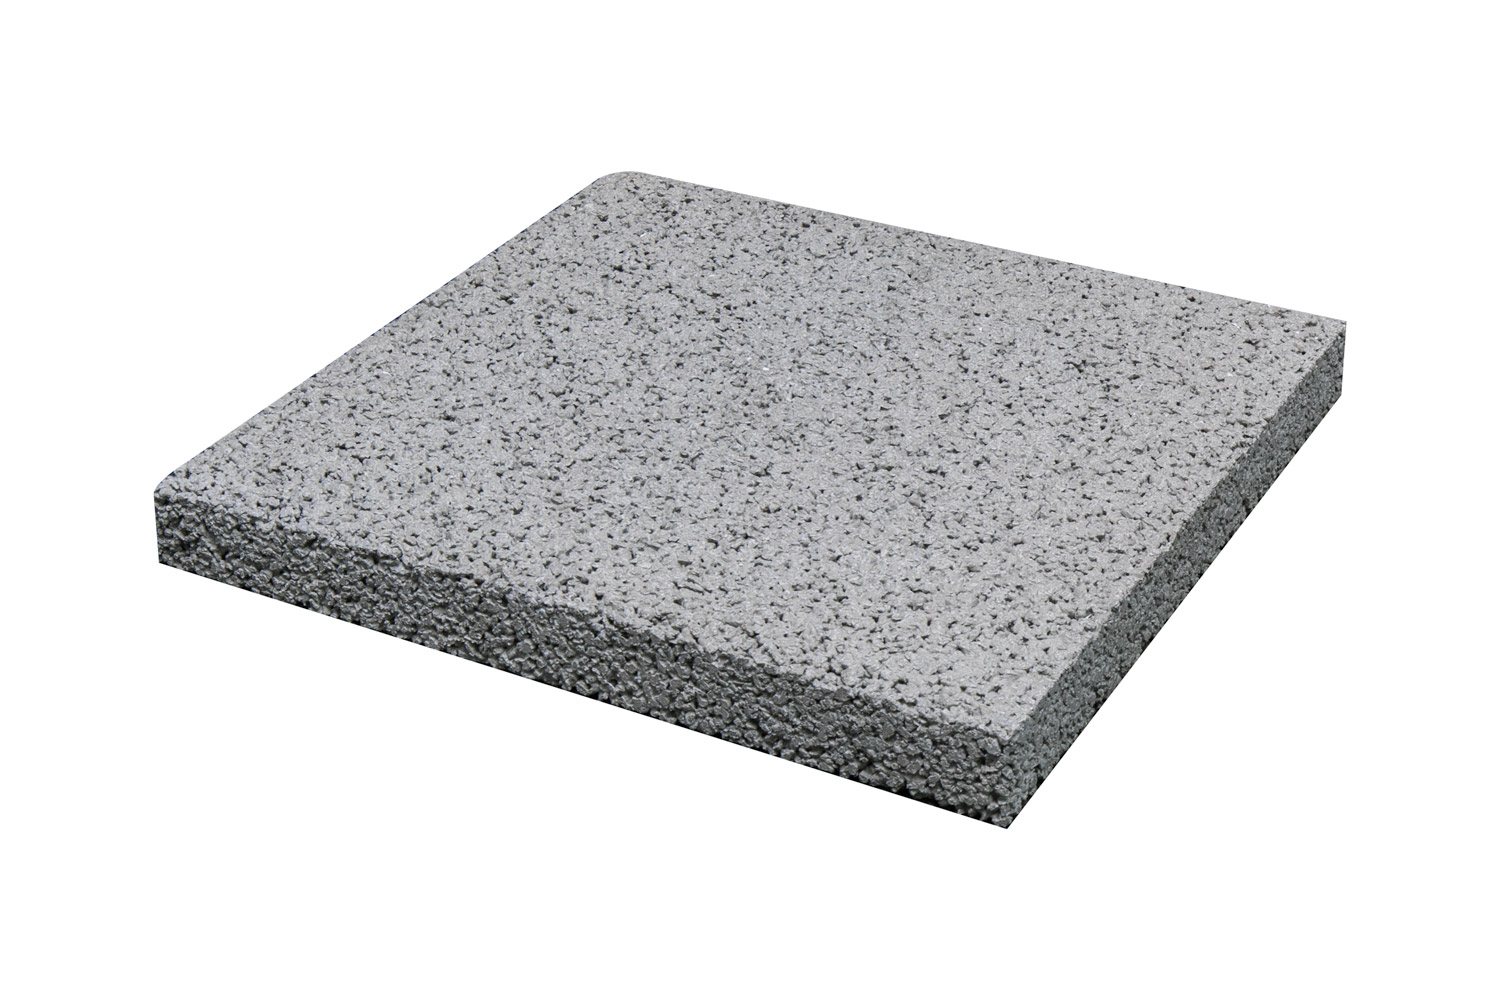 TORRENT PAVER (PERMEABLE)